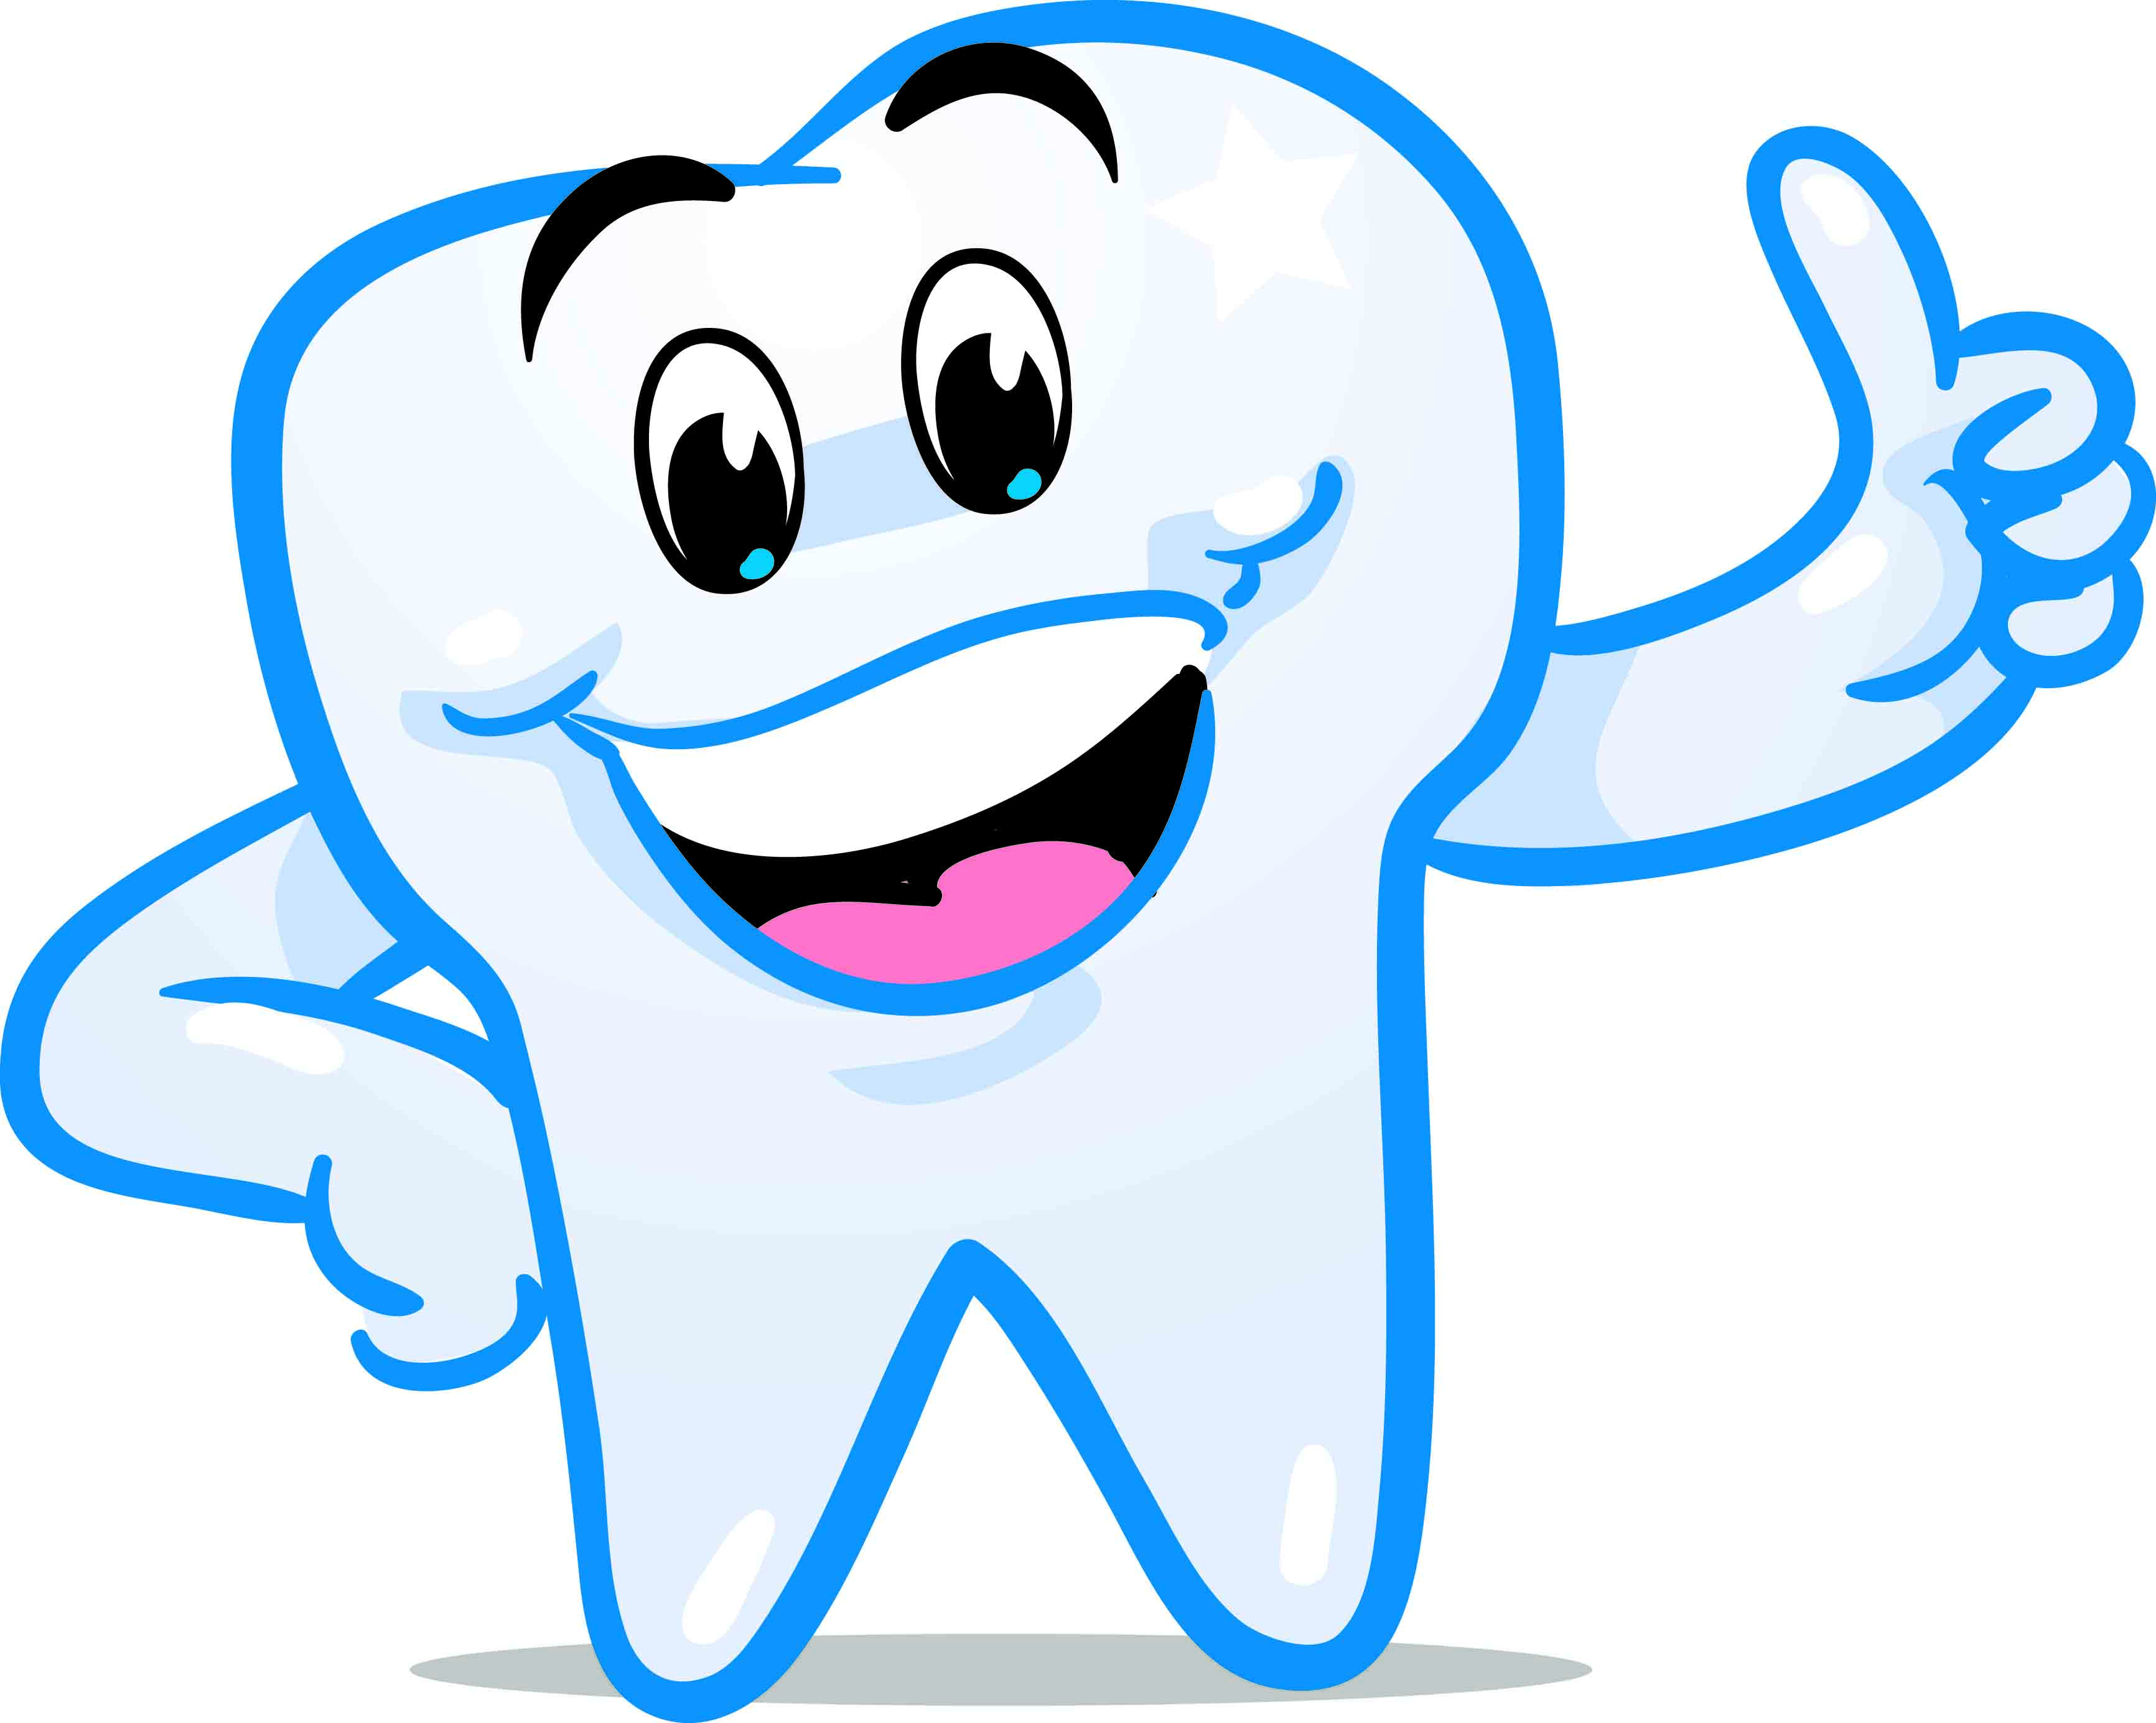 Teeth images cartoon tooth free vector for free download about 3 cliparts